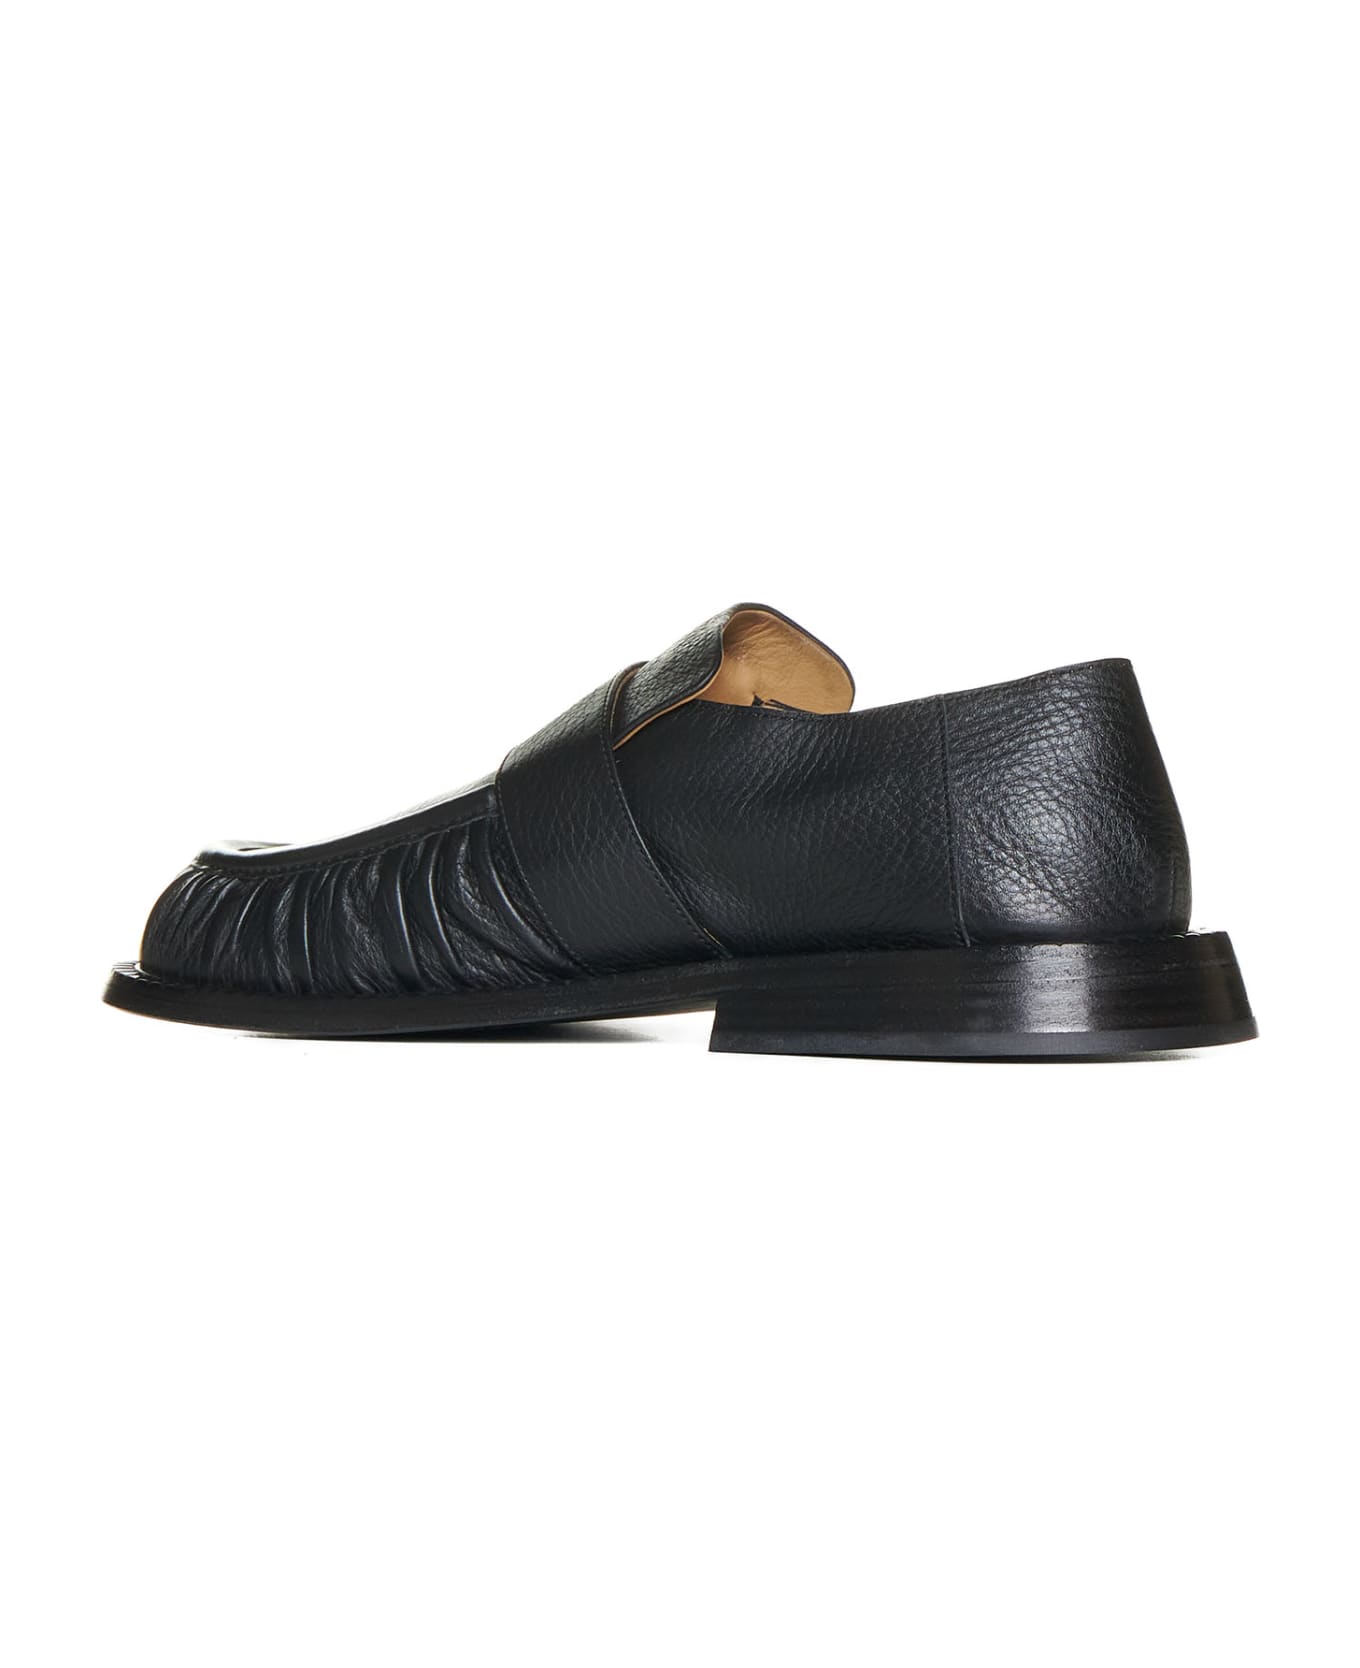 Marsell Loafers - Black